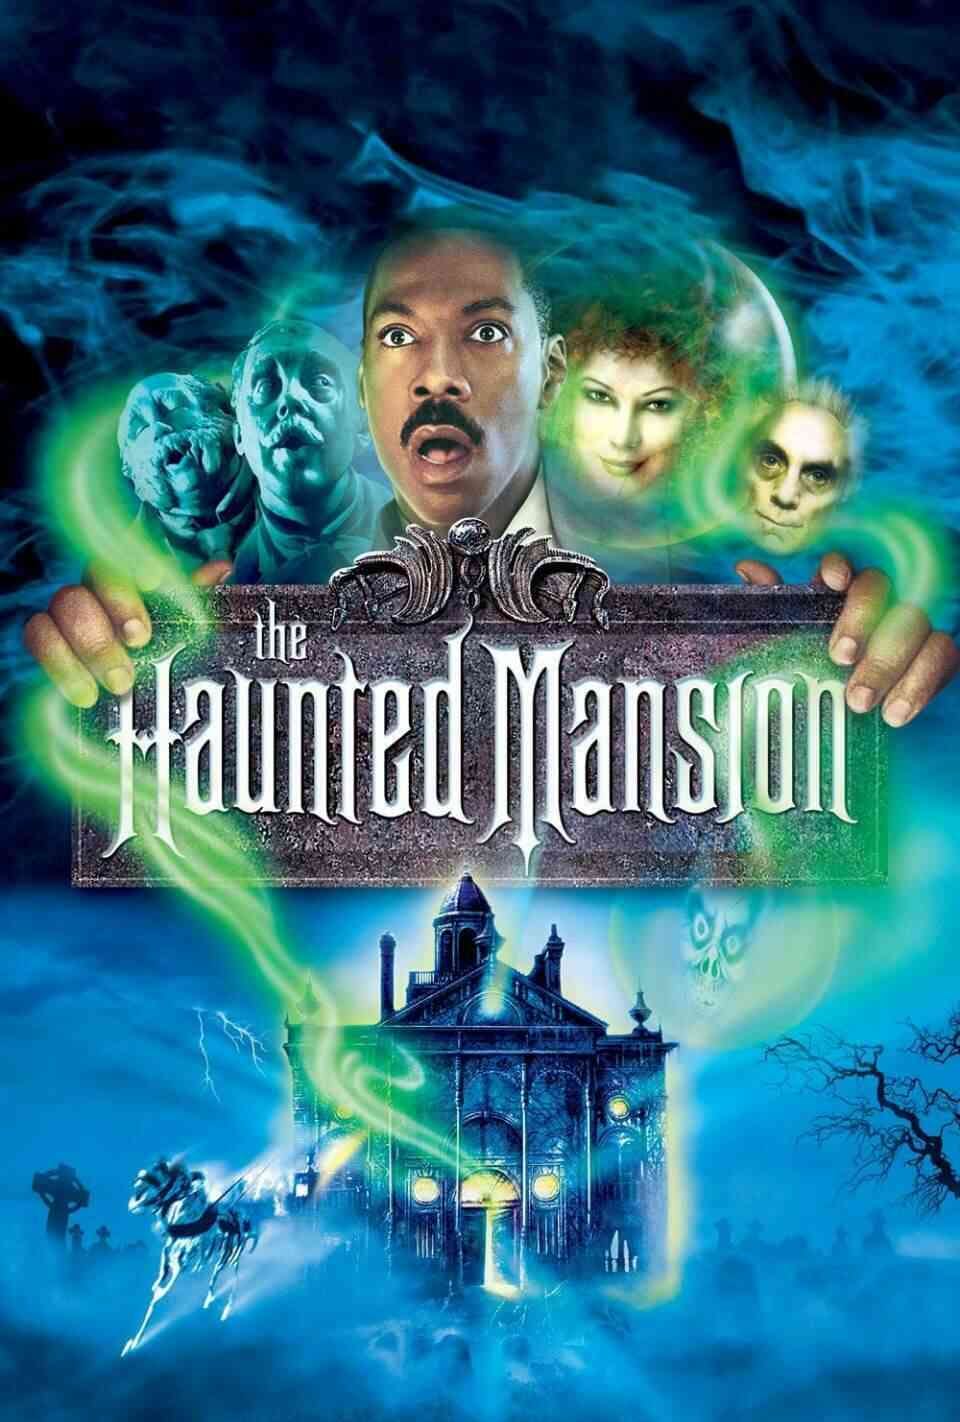 Read The Haunted Mansion screenplay (poster)